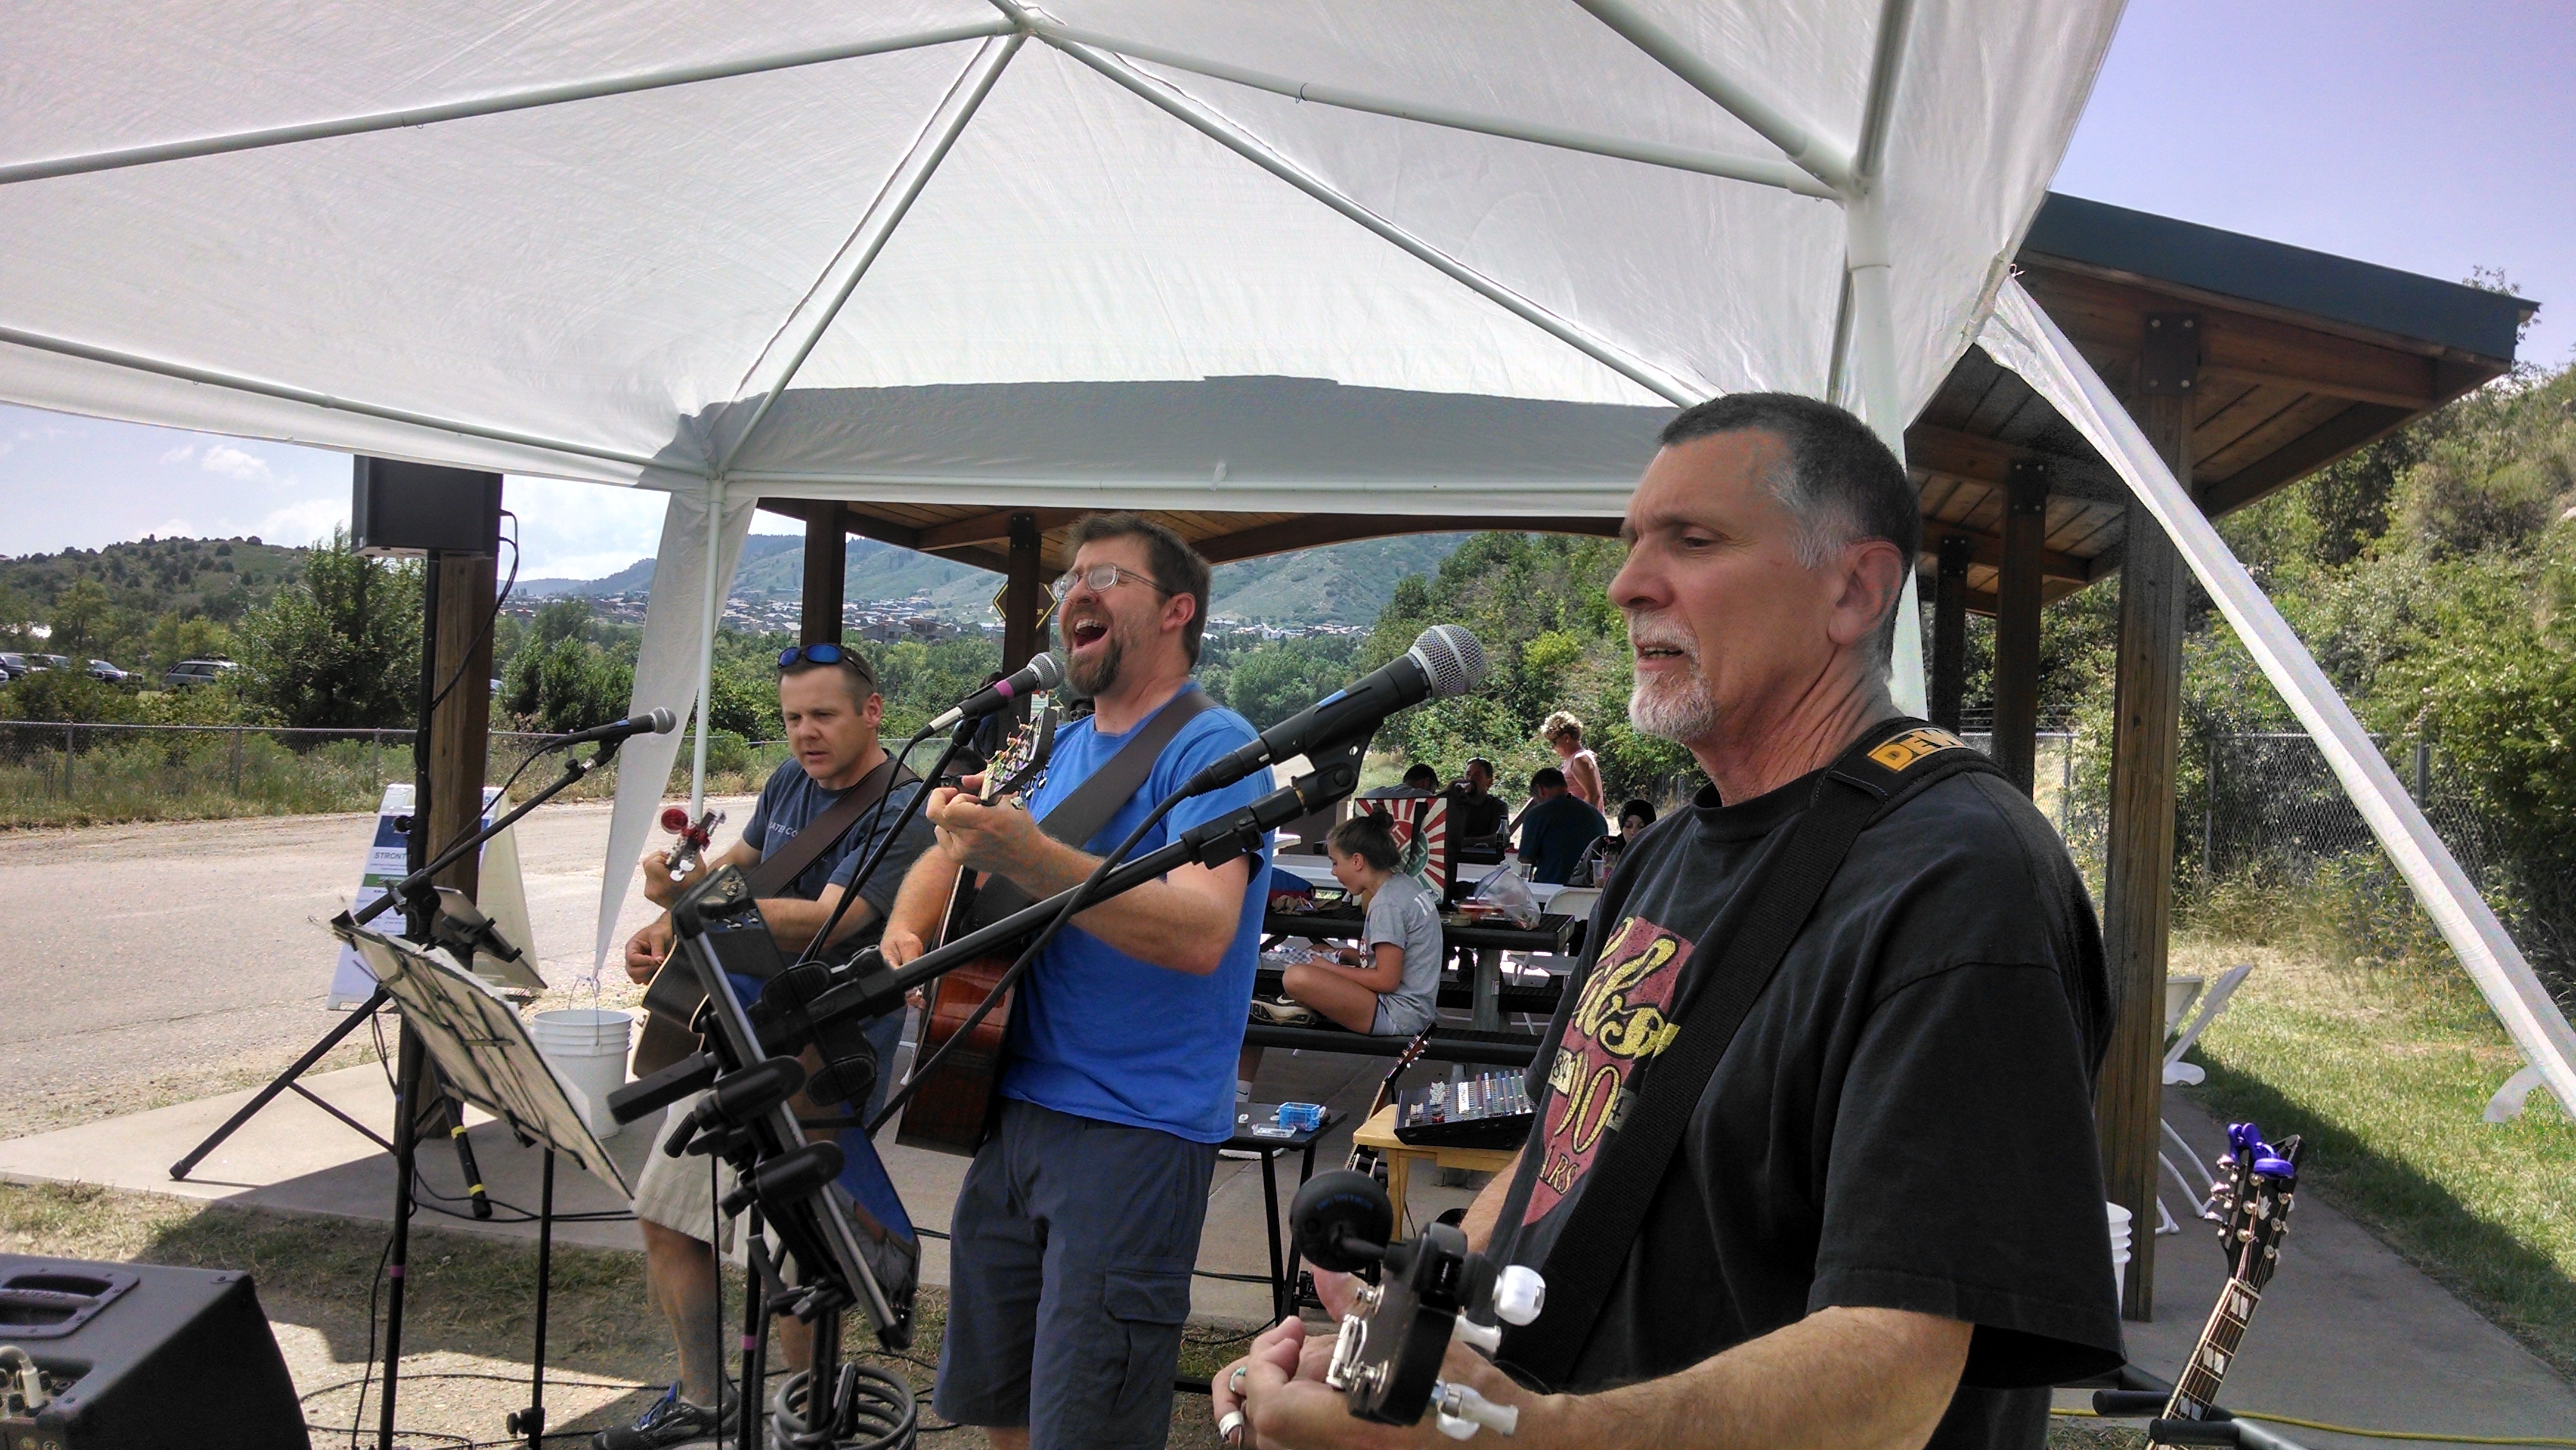 Pennies on the Track, made up of current and former Denver Water employees, provided music for the 100th anniversary celebration in Waterton Canyon on Aug. 10. From left, the band members Brian Good, chief administrative officer, Jack Keith, engineer, and Neil Sperandeo, former manager of recreation.